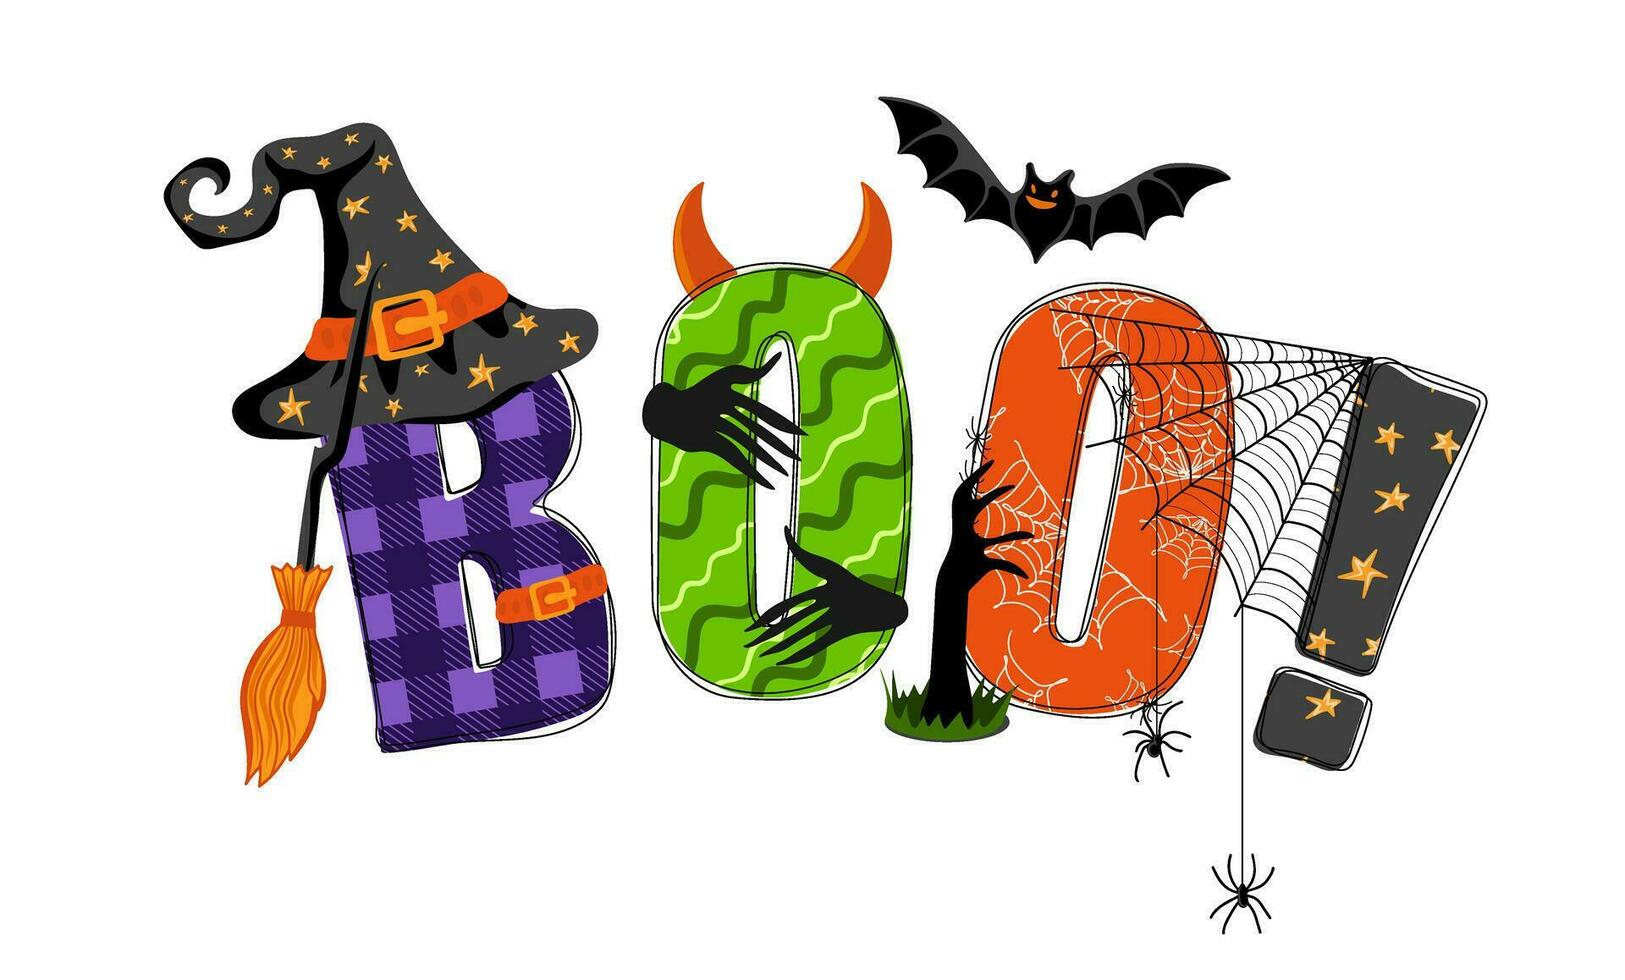 Boo. Hand drawn doodle text with witch hat, bat, spiders and zombie hands. Happy Halloween vector